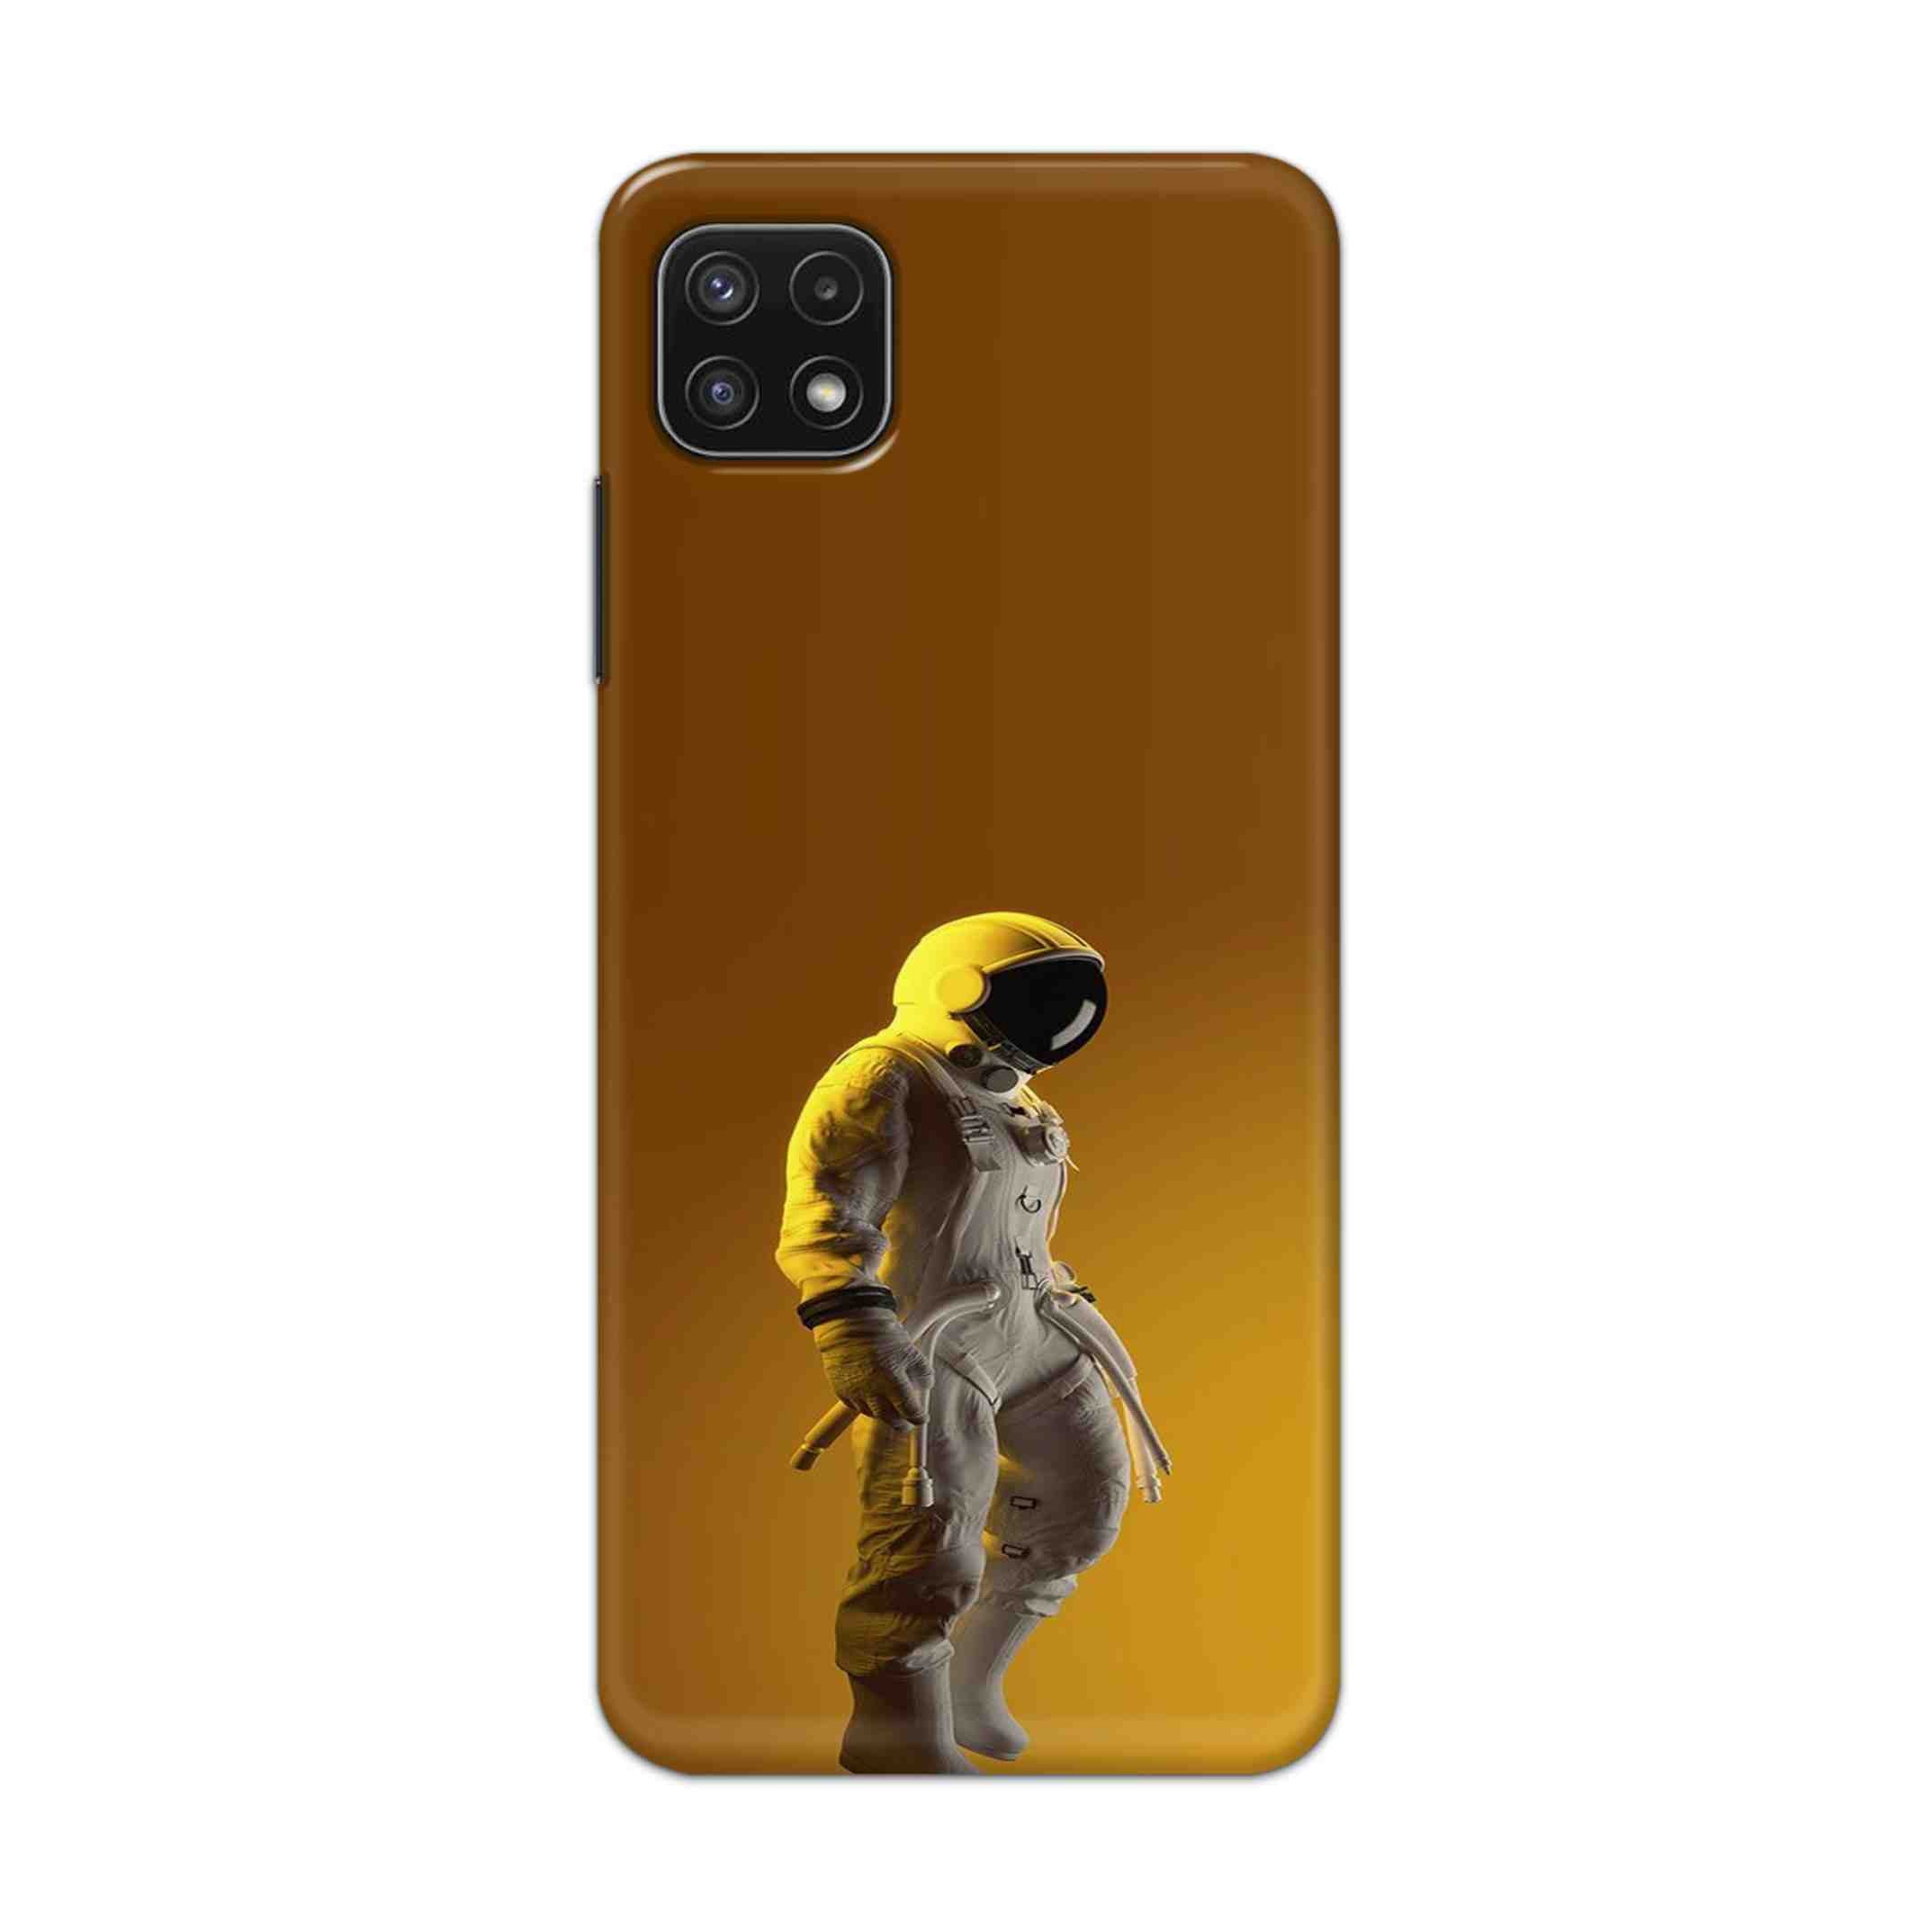 Buy Yellow Astronaut Hard Back Mobile Phone Case Cover For Samsung A22 5G Online